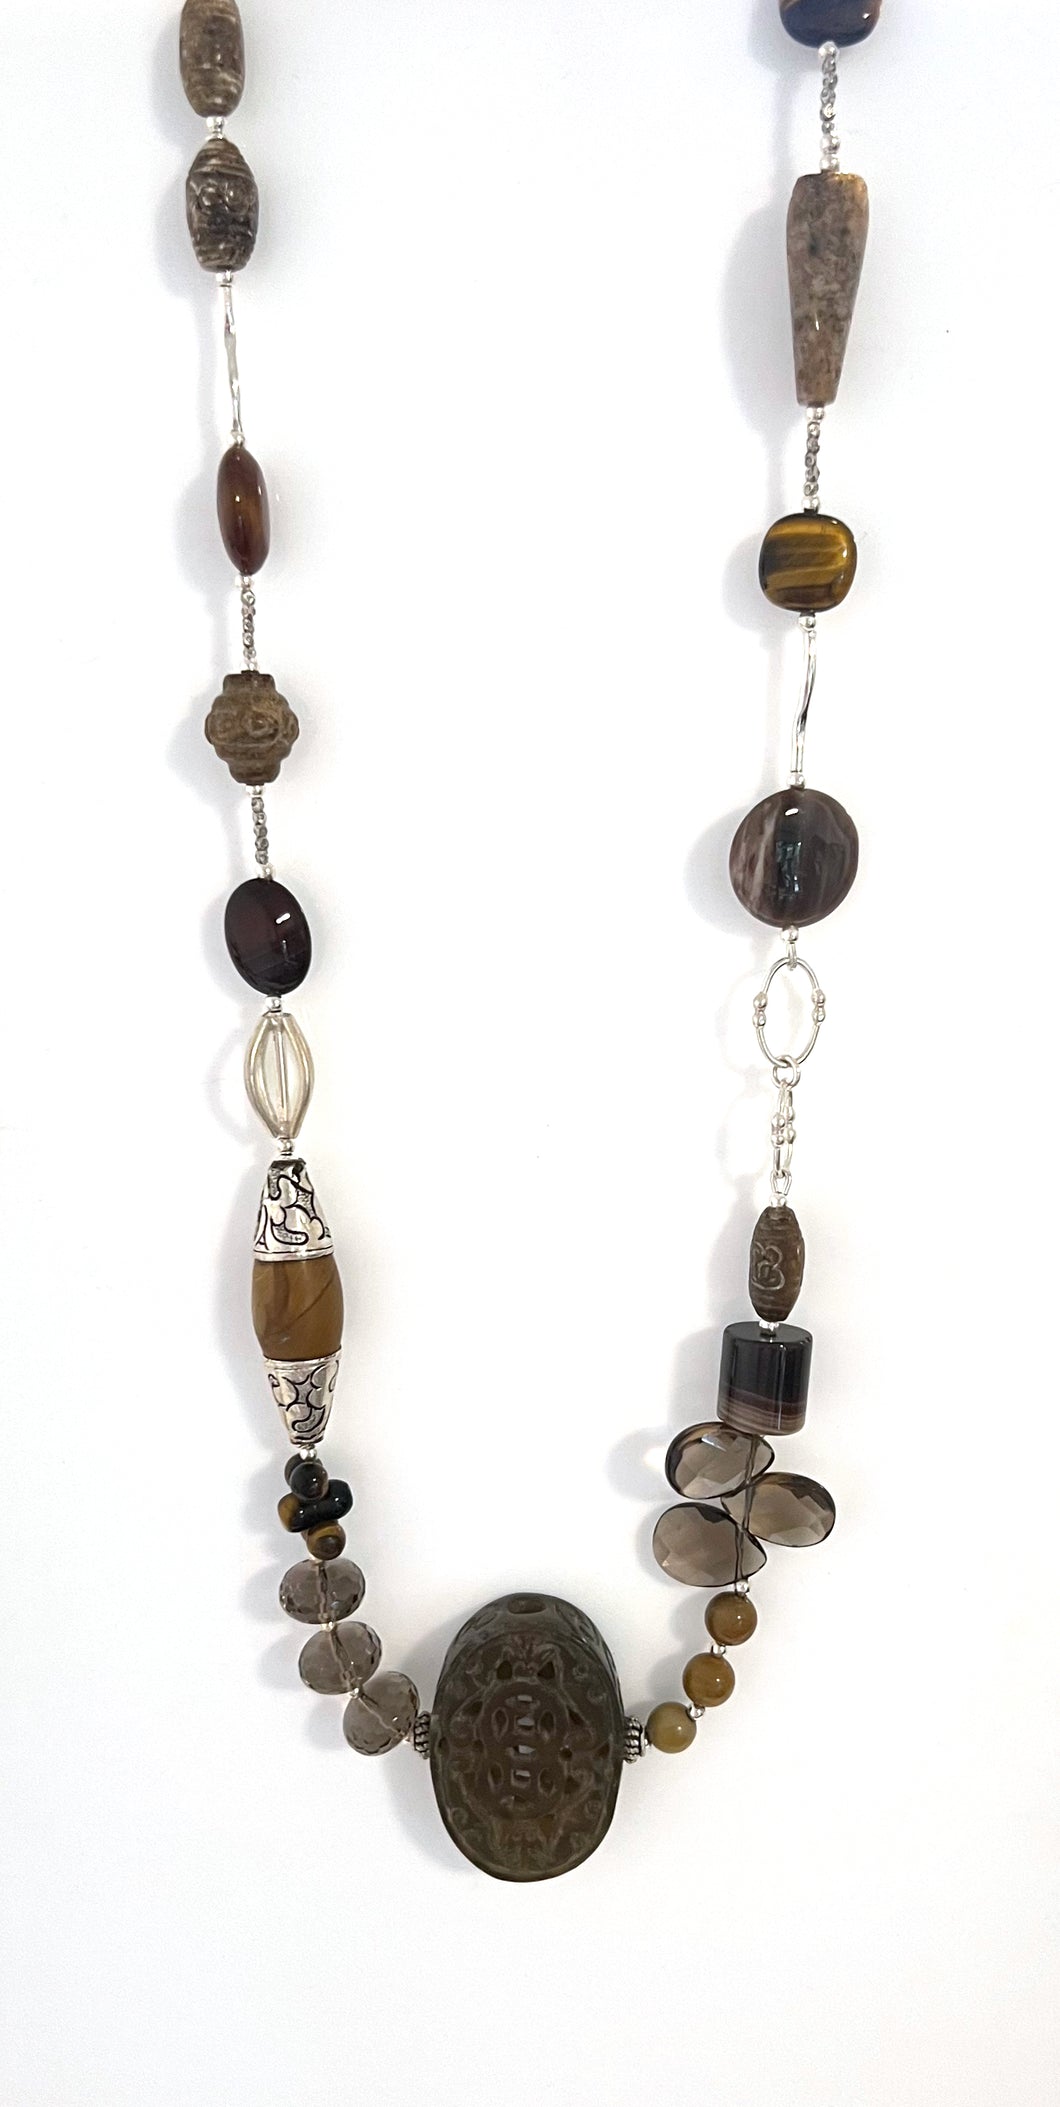 Australian Handmade Brown Necklace with Jasper Smoky Quartz Tigers Eye Agate Jade and Sterling Silver